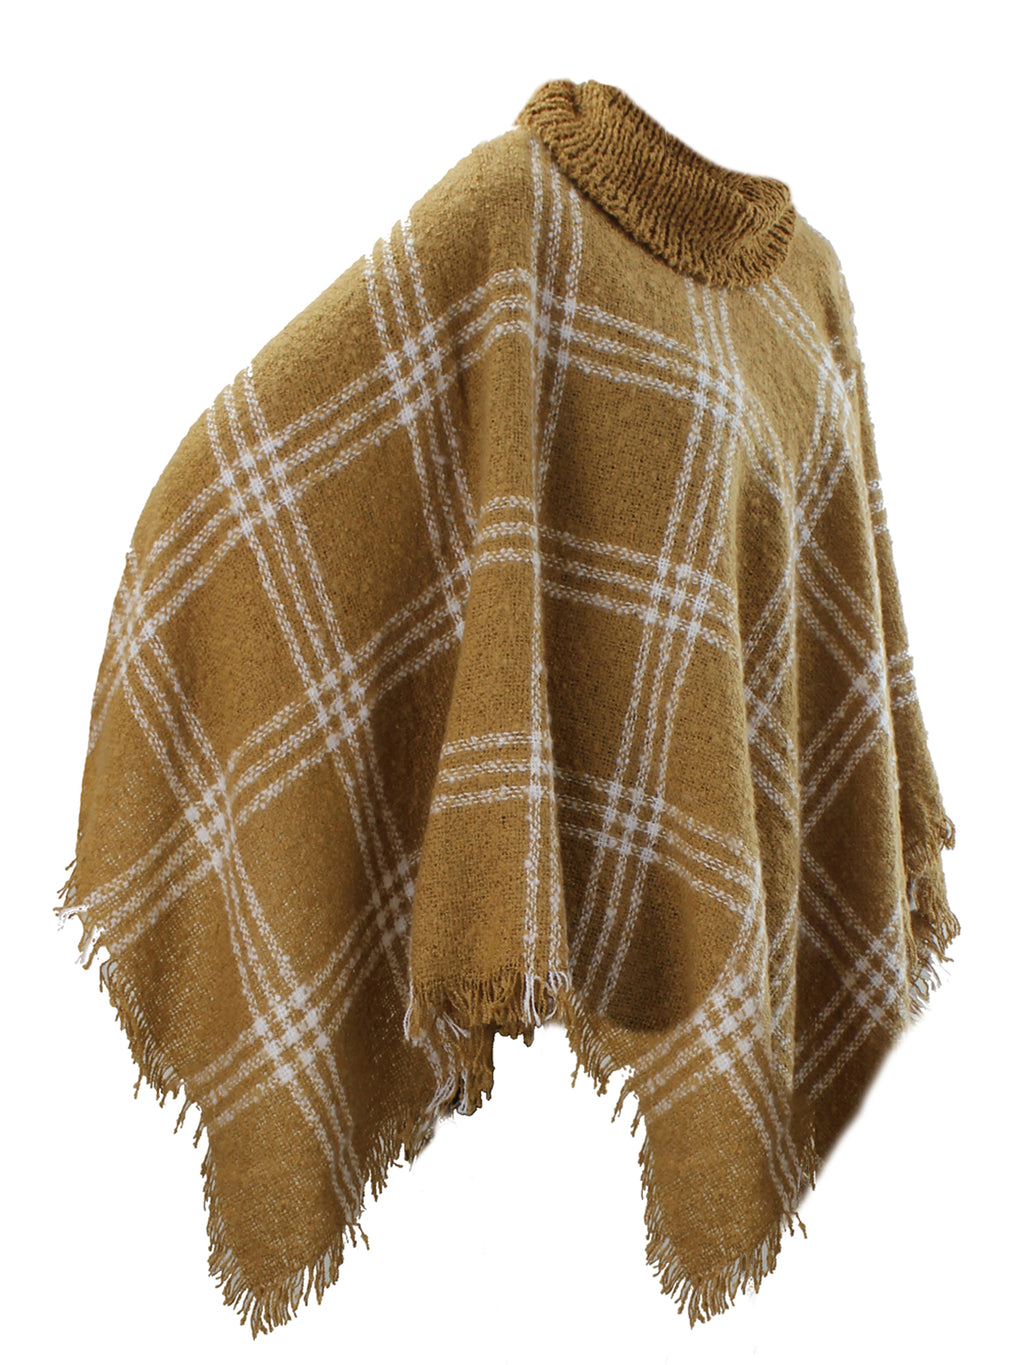 Camel Beige Cowl Neck Womens Pullover Poncho Cape